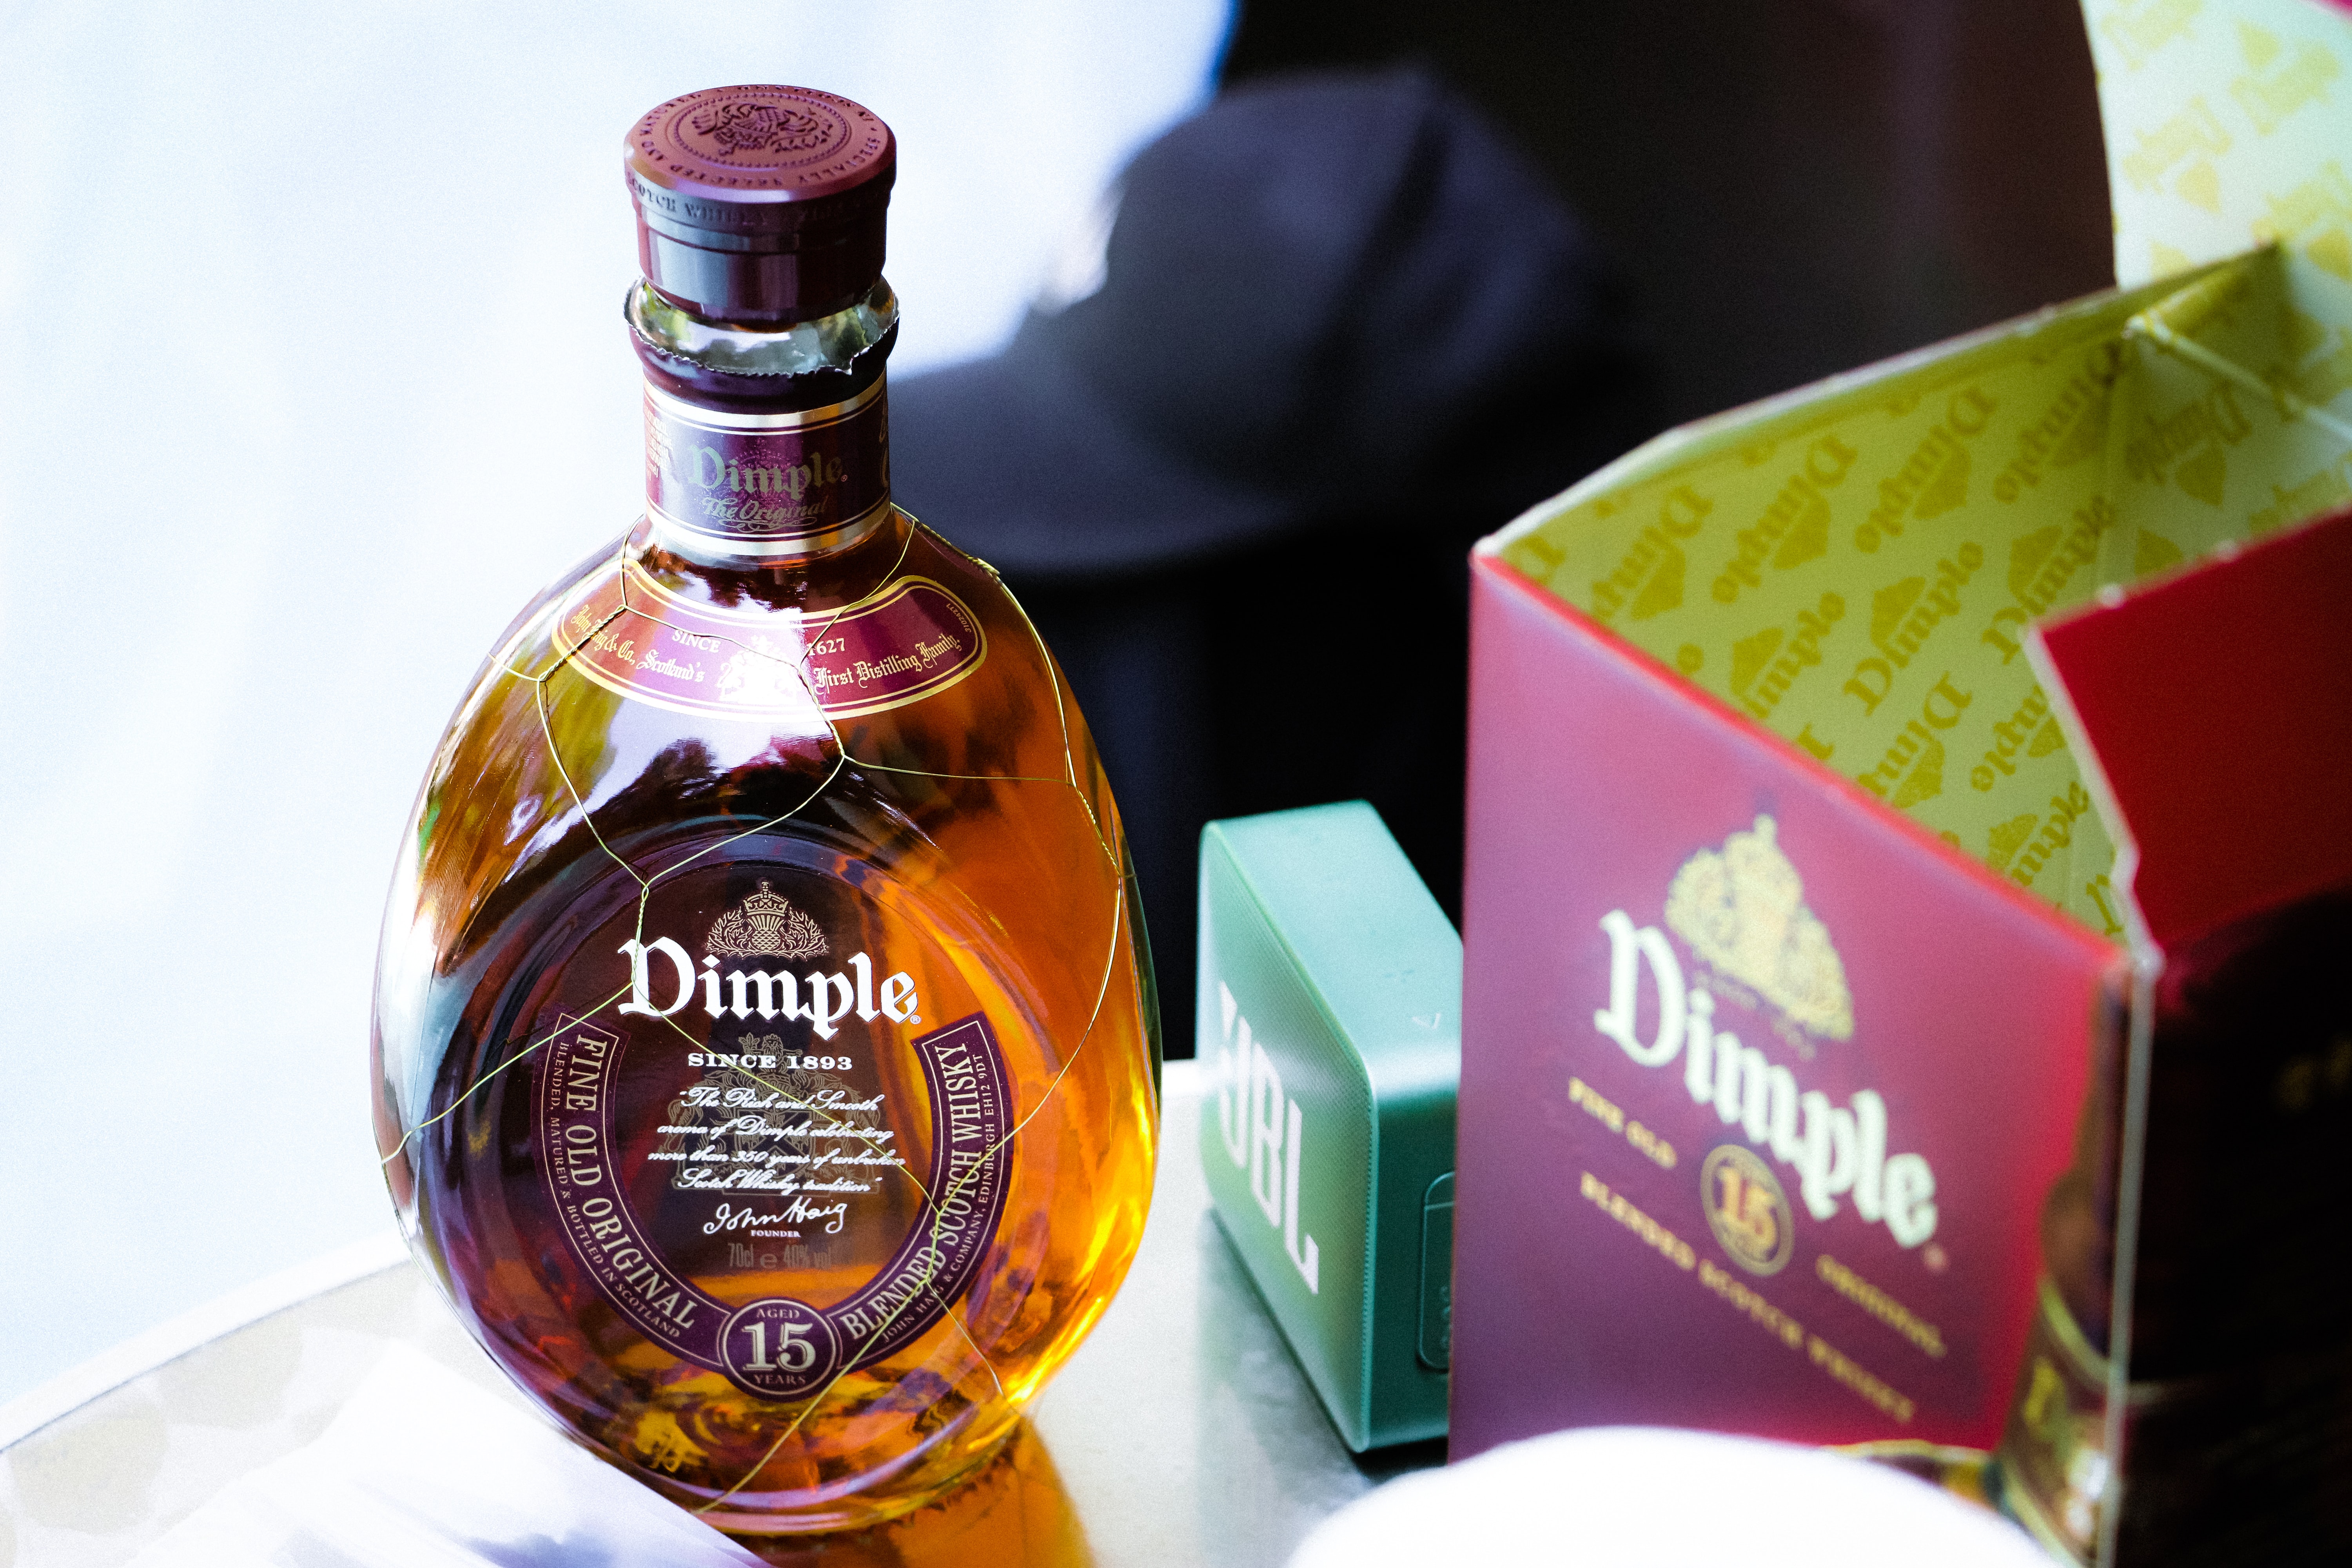 dimple whisky